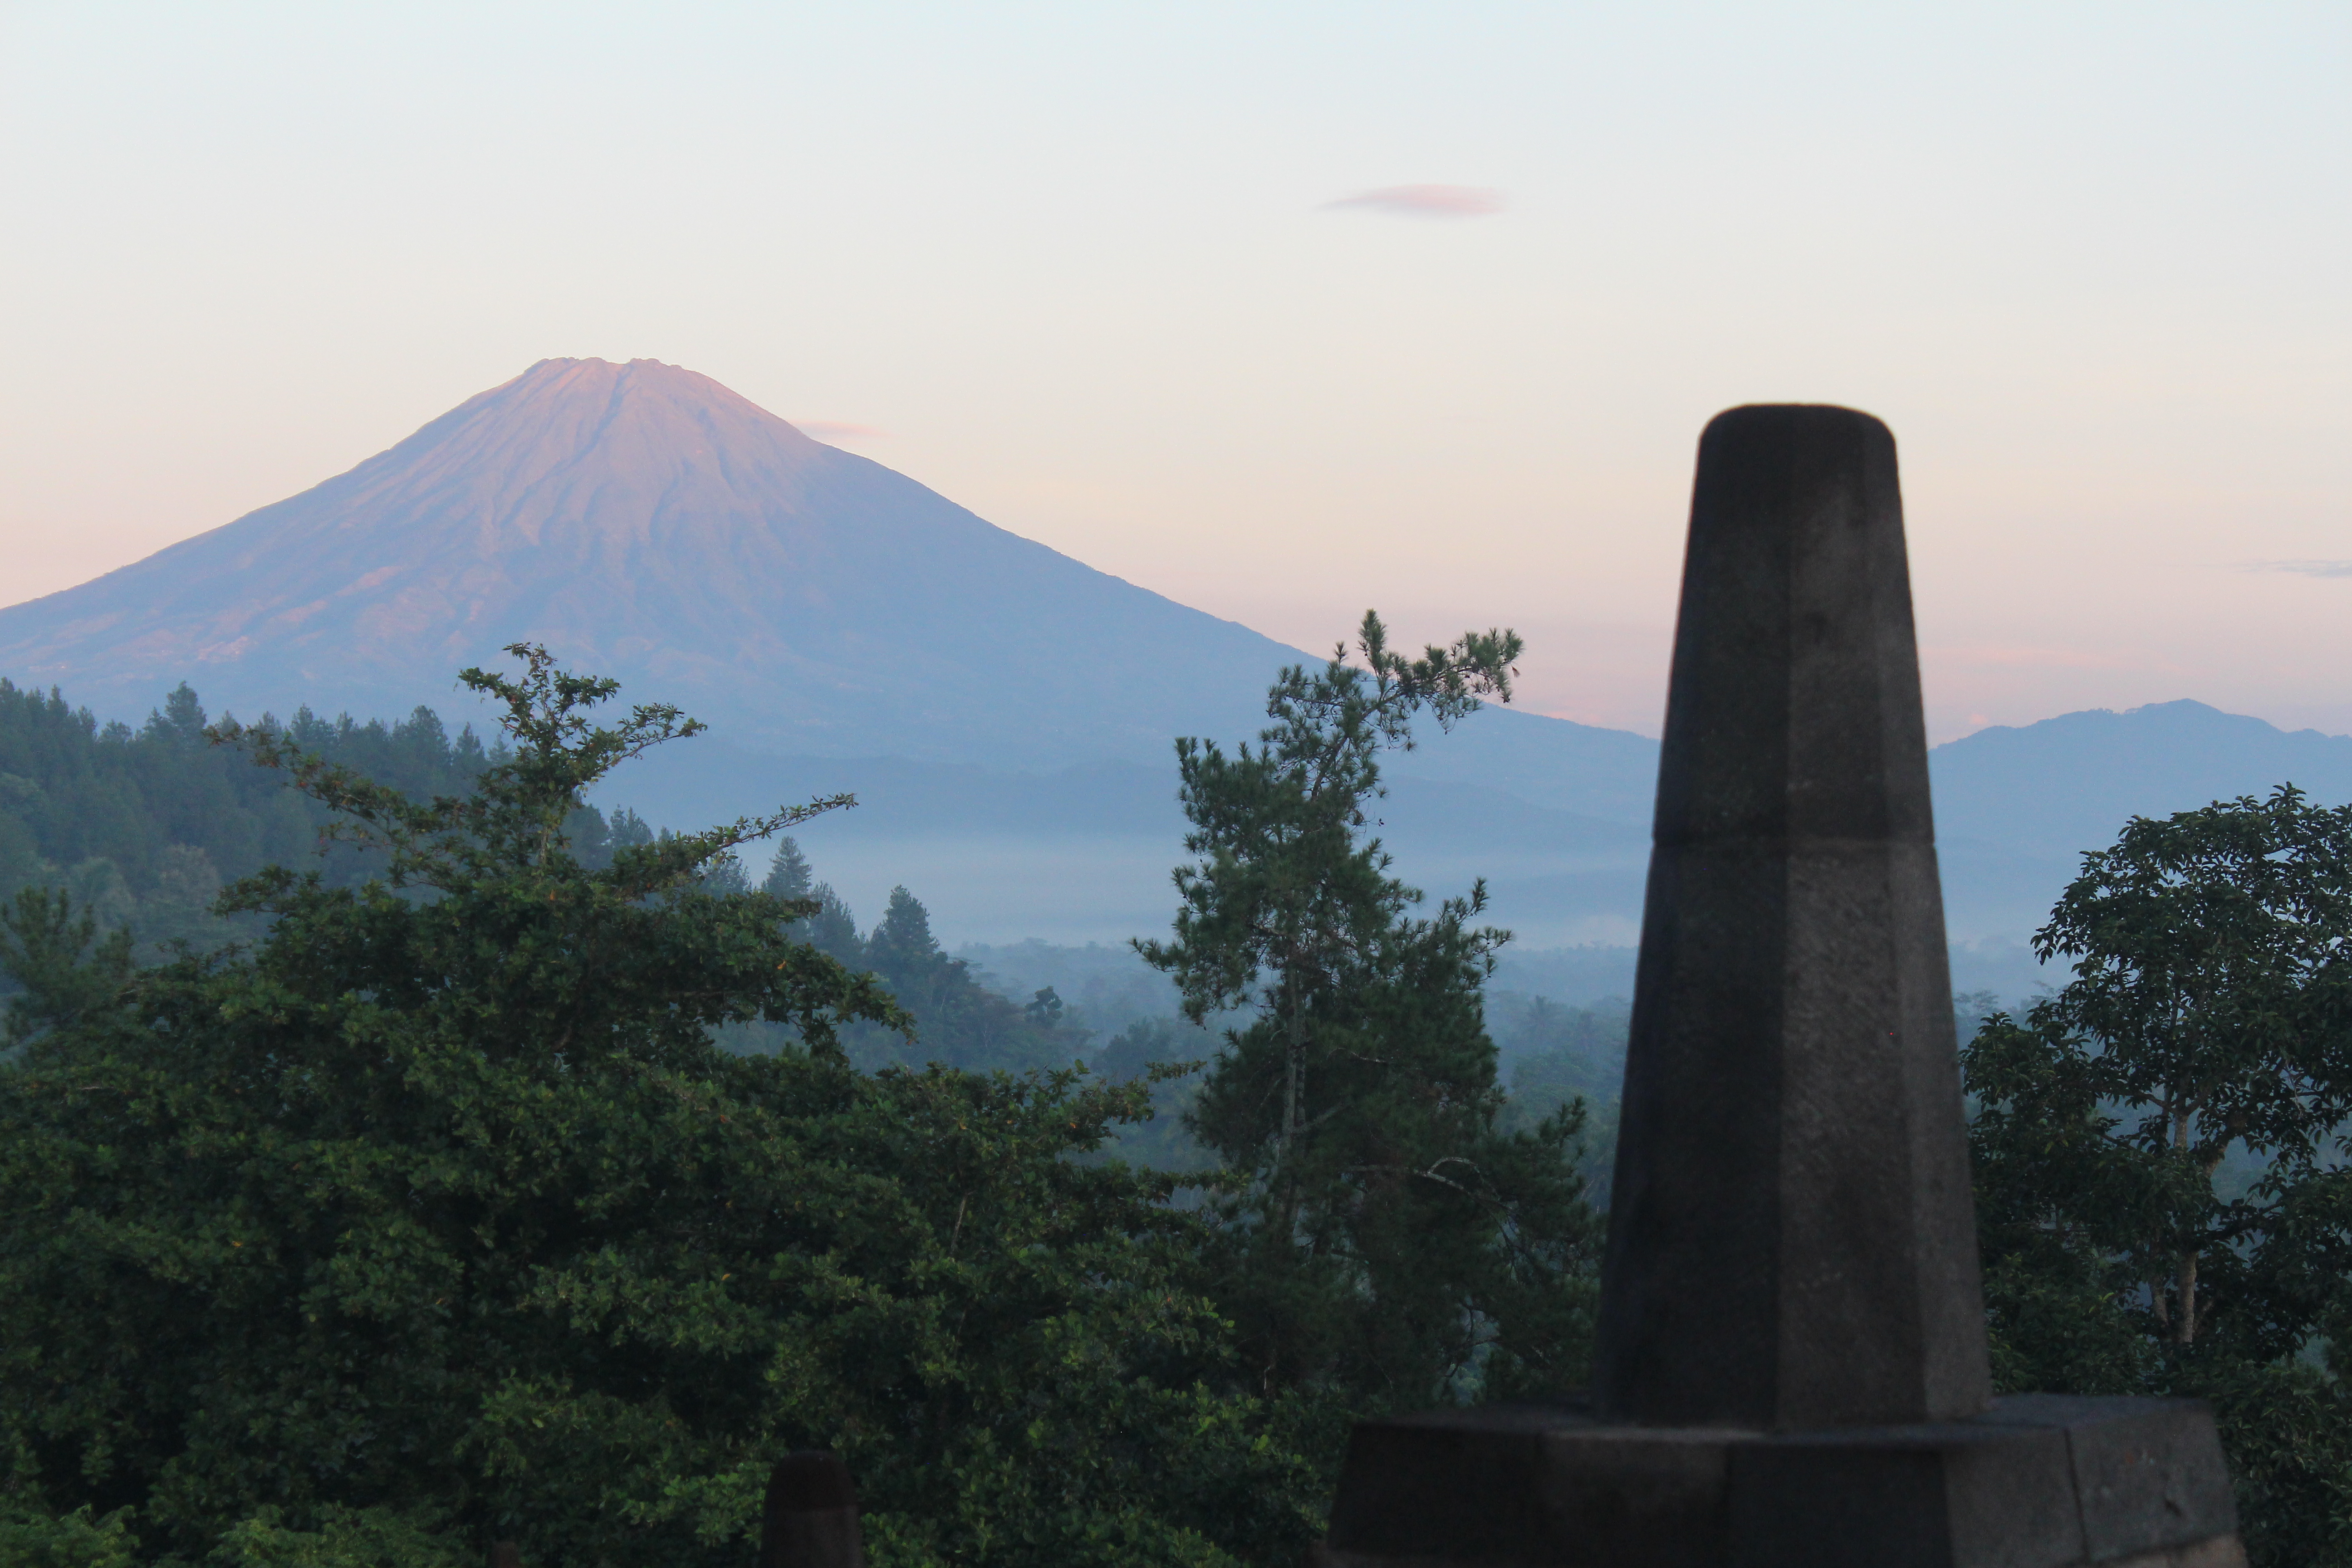 Volcanic mountain glowing in sunrise light, with stupa finial in foreground and lush landscape